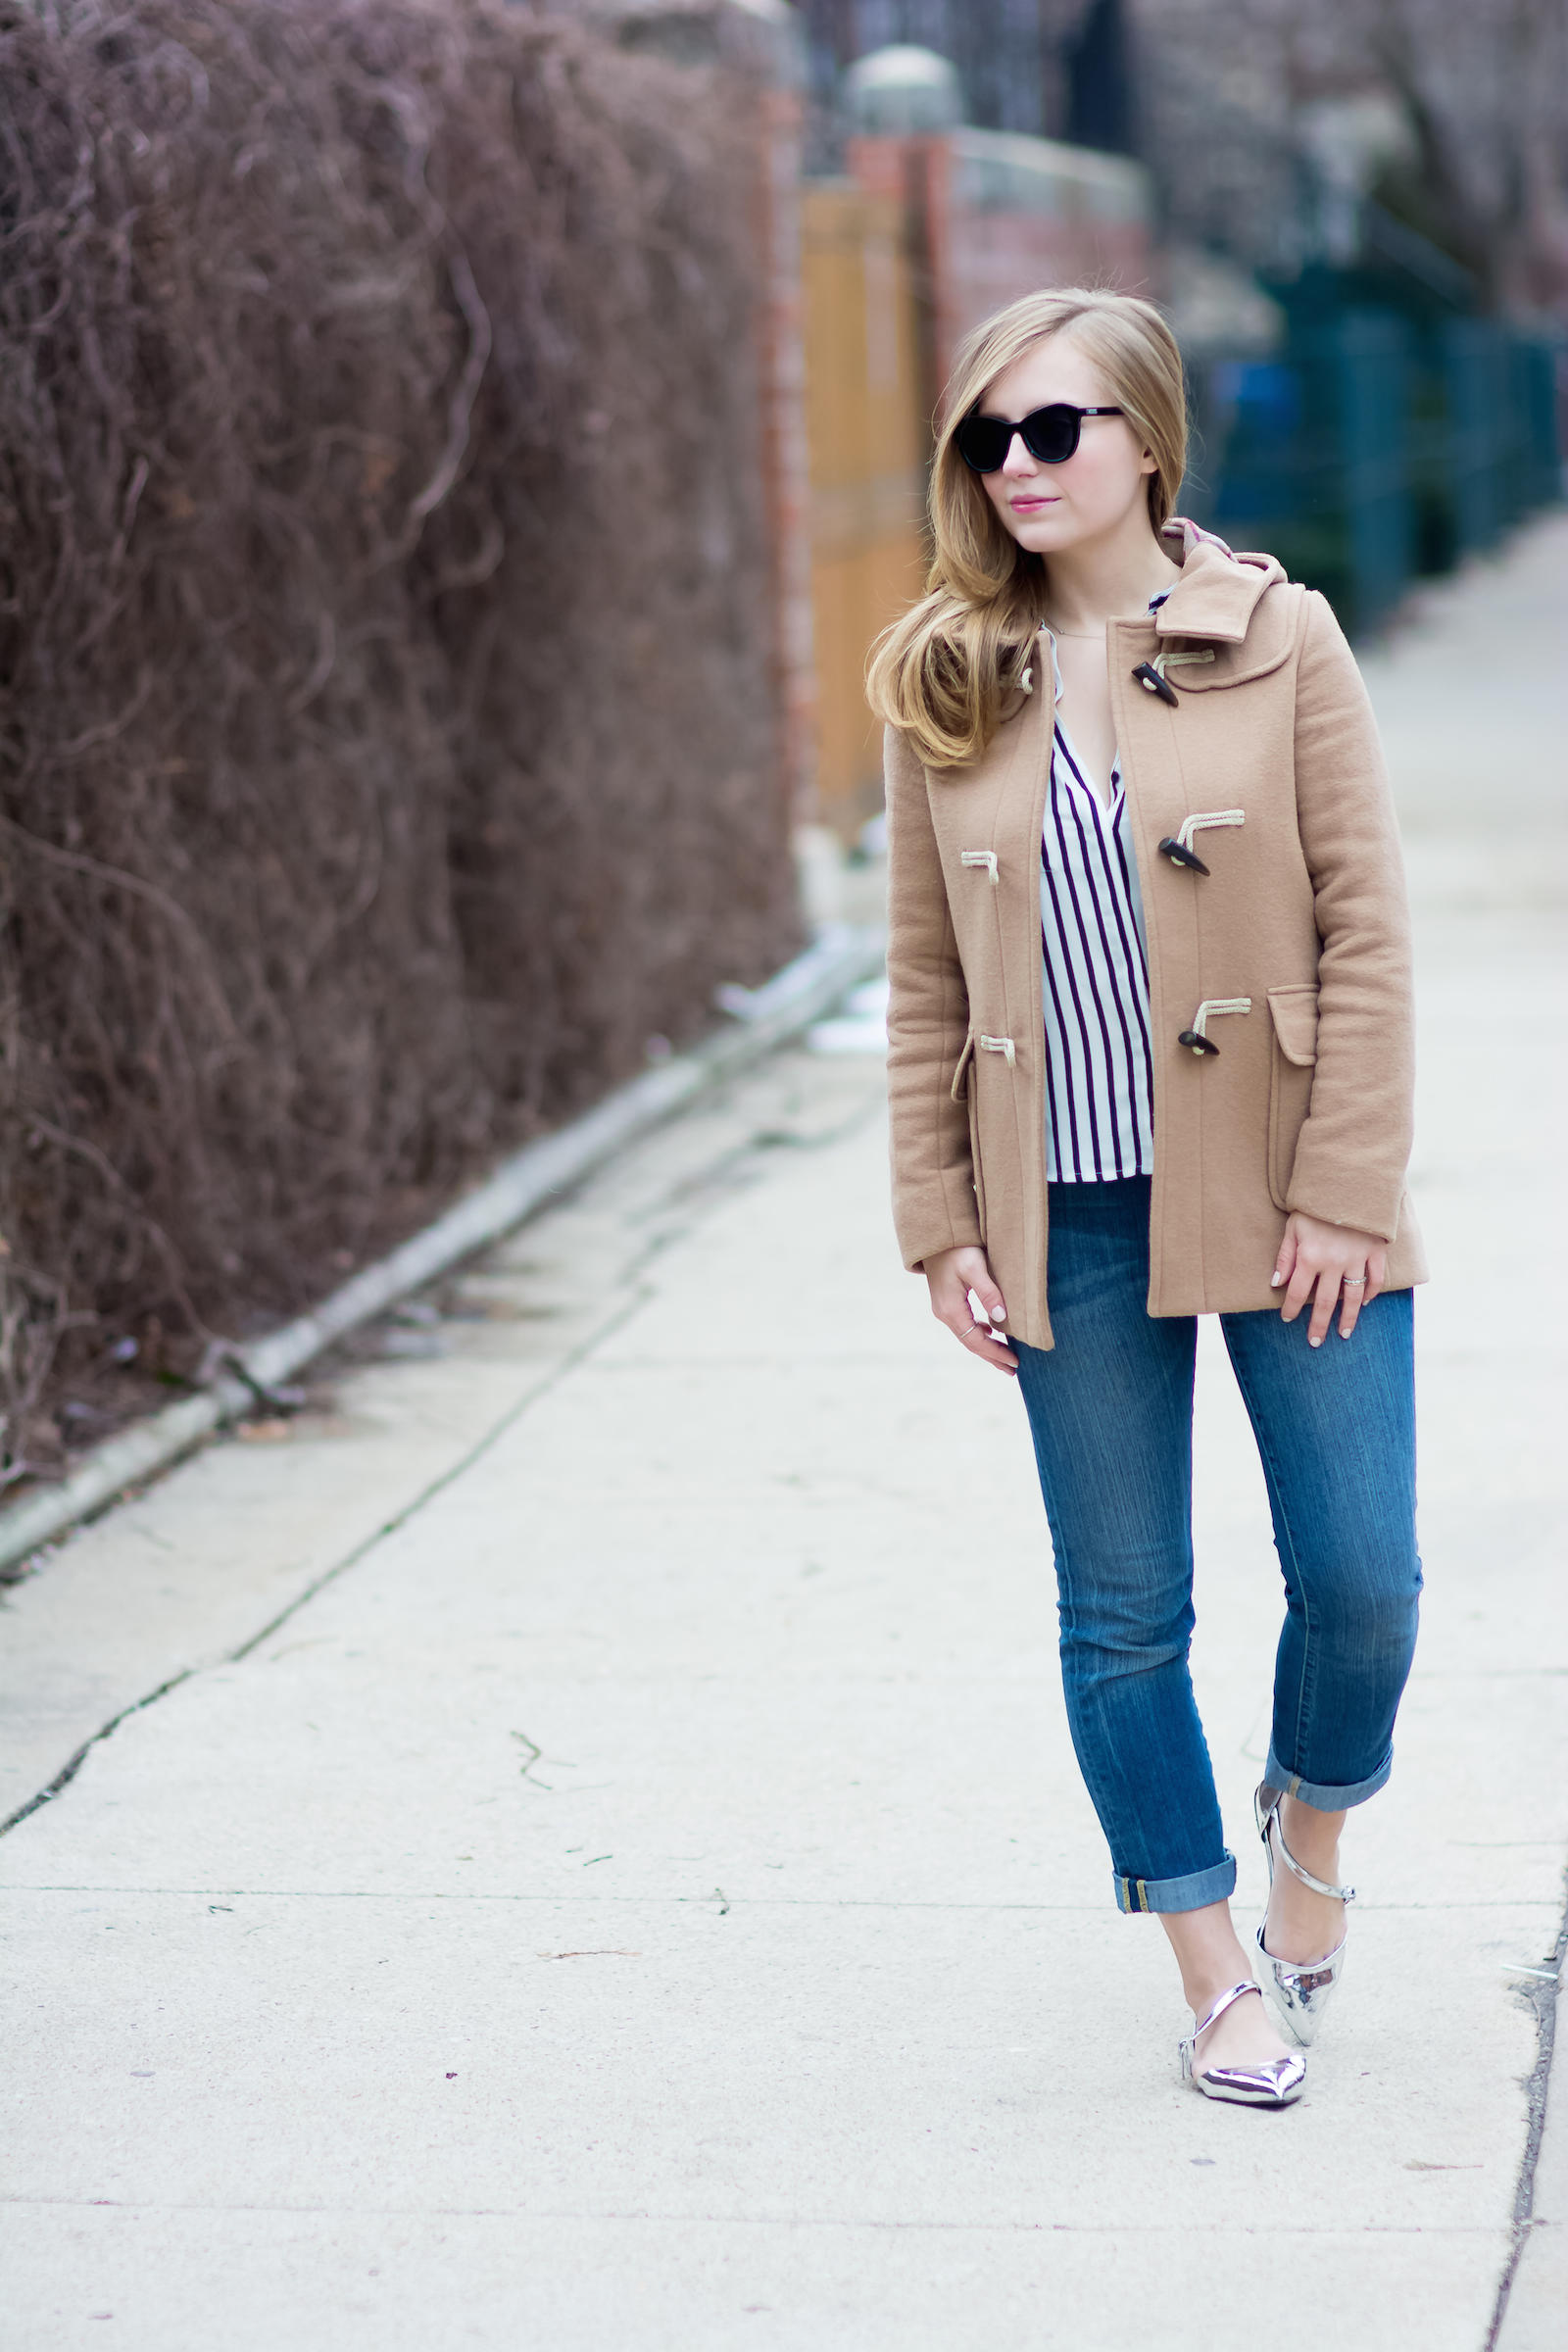 Stripe Silver Spring Outfit Chicago Blogger